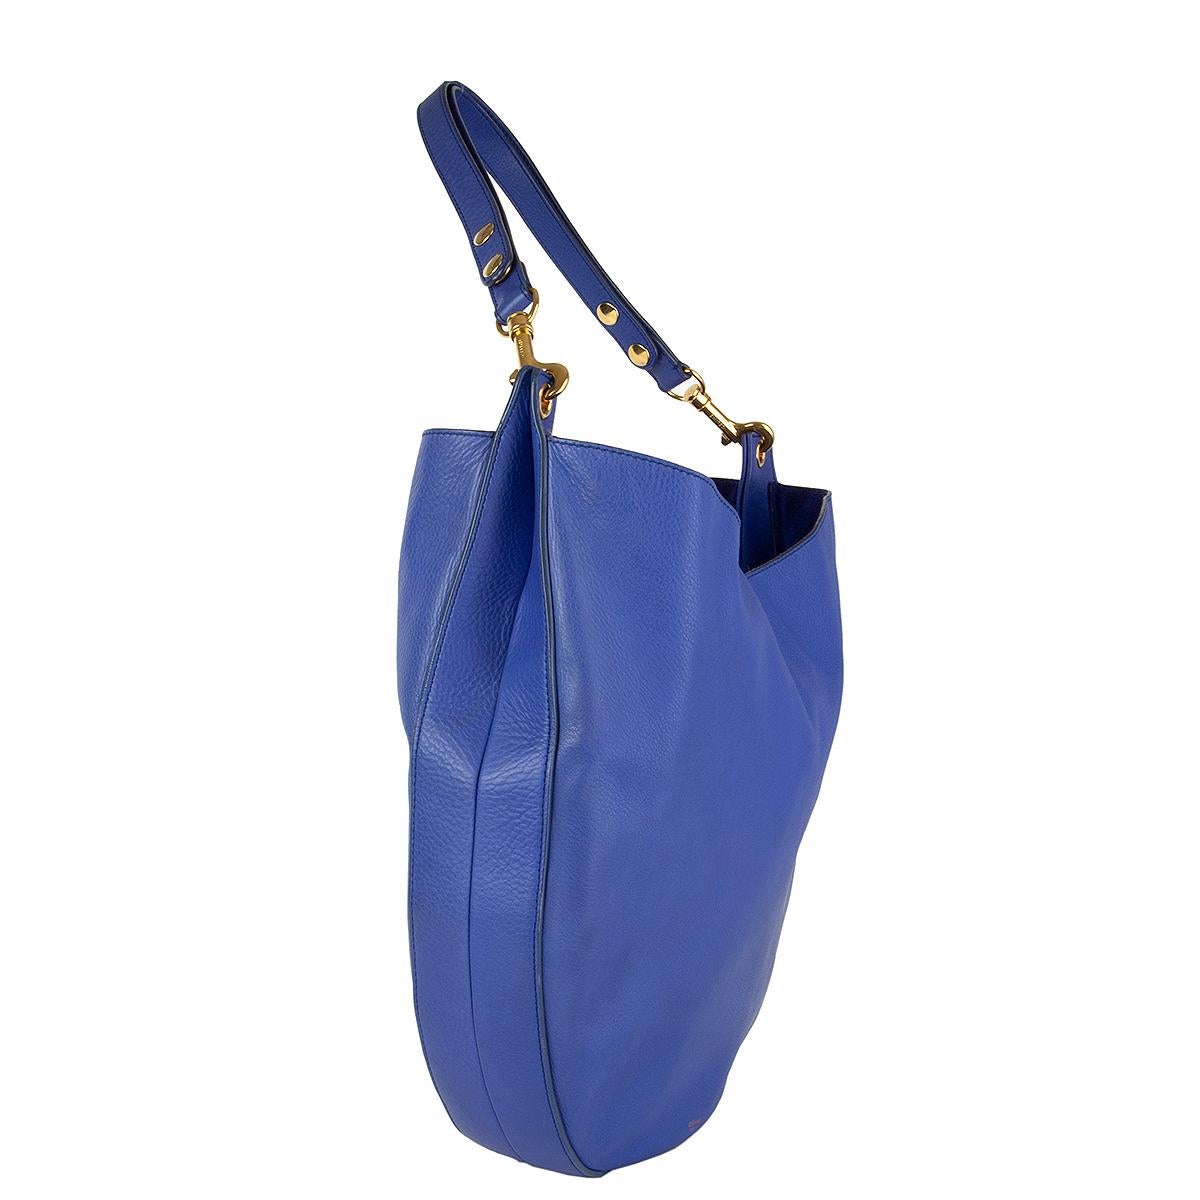 Celine 'Hobo Large' shoulder bag in Indigo (ultraviolet) Supple Calf leather. Adjustable shoulder strap. Closes with two straps that tie. Unlined with a zip pouch on a string. Has been carried and is in excellent condition.

Height 32cm